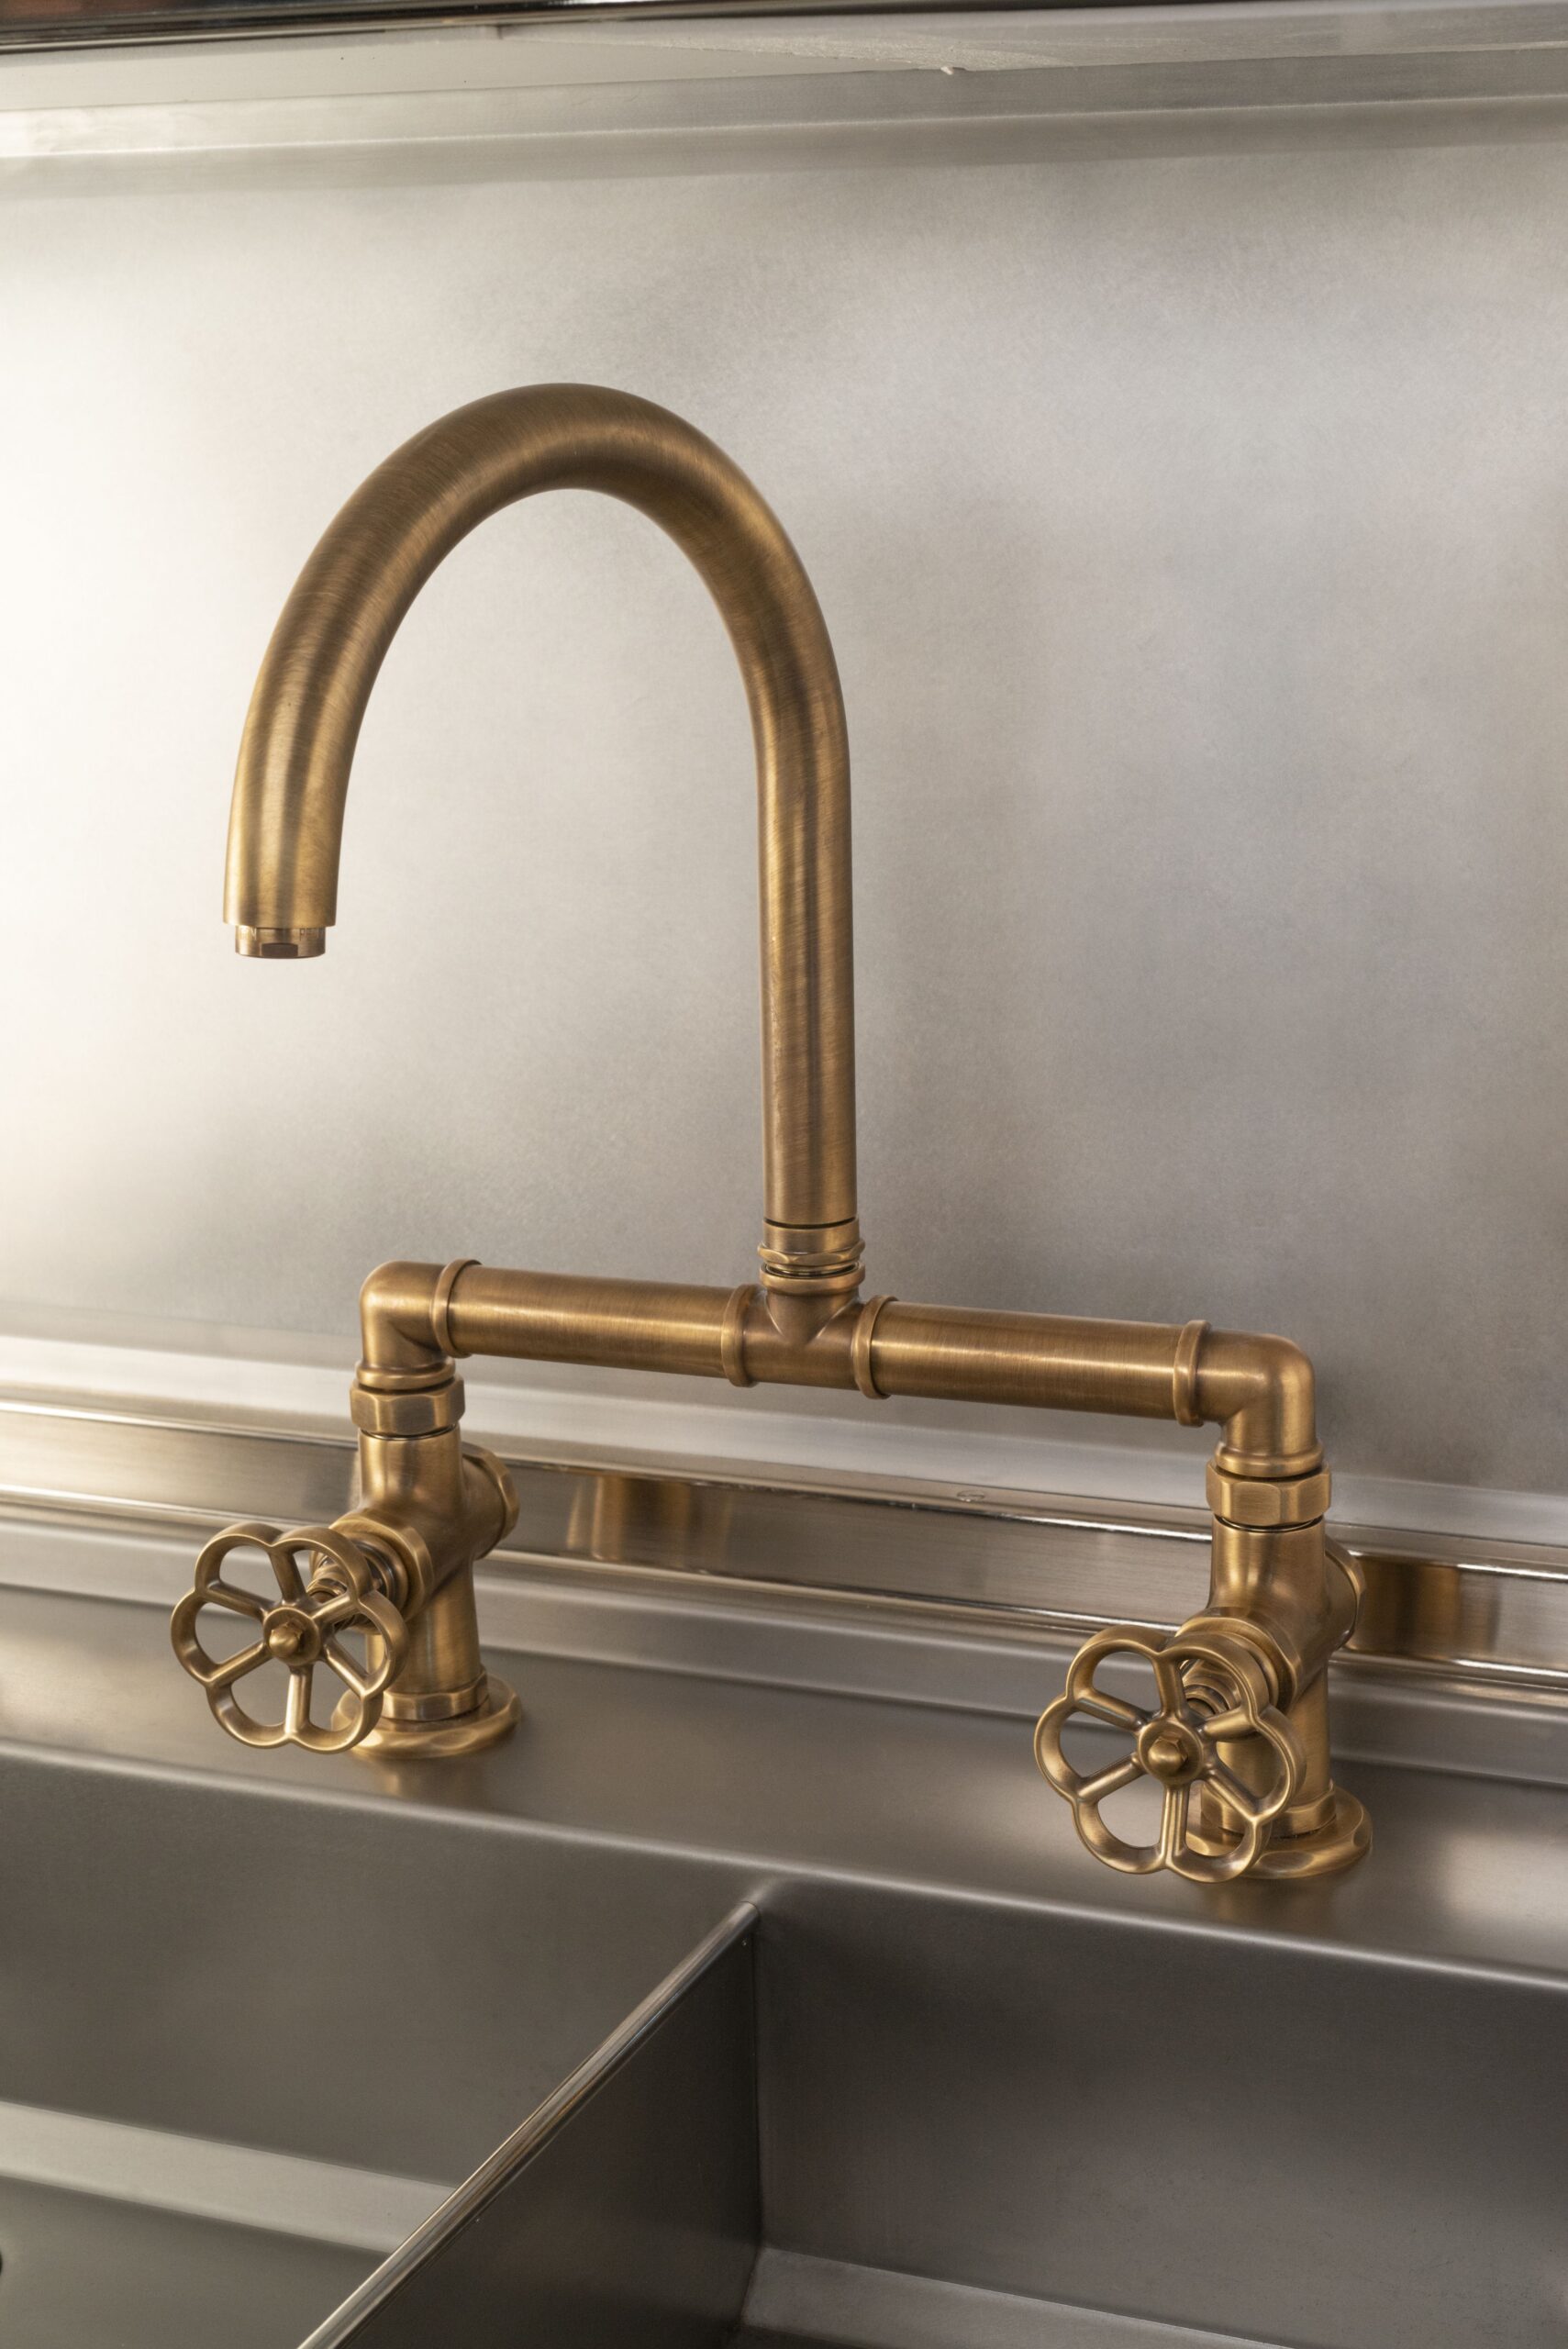 Brass Tap Designs: Adding a Touch of Vintage Charm to Your Home